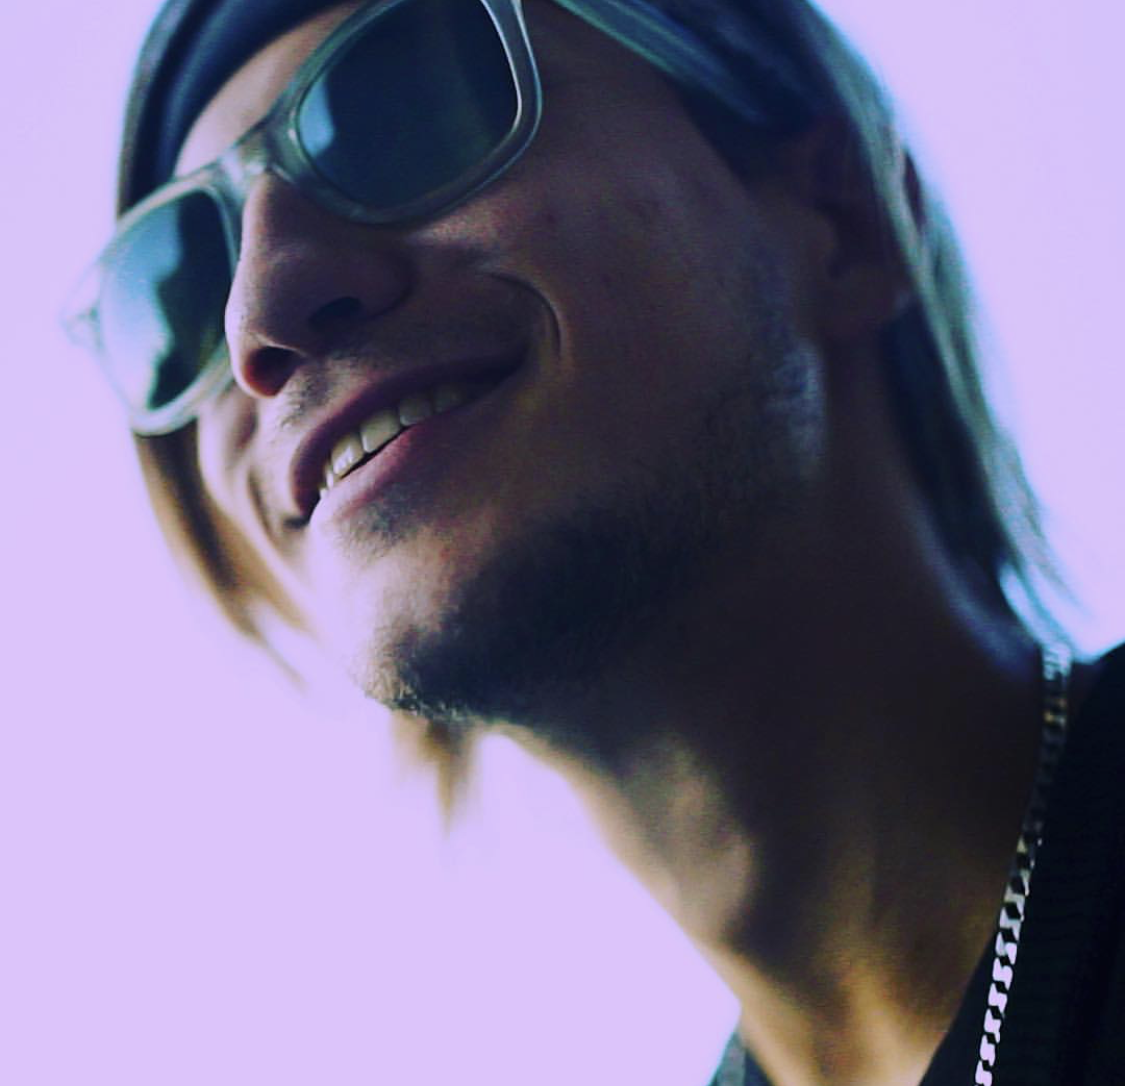 A headshot of Brett Devloo, who is smiling and wearing a bandana and sunglasses.